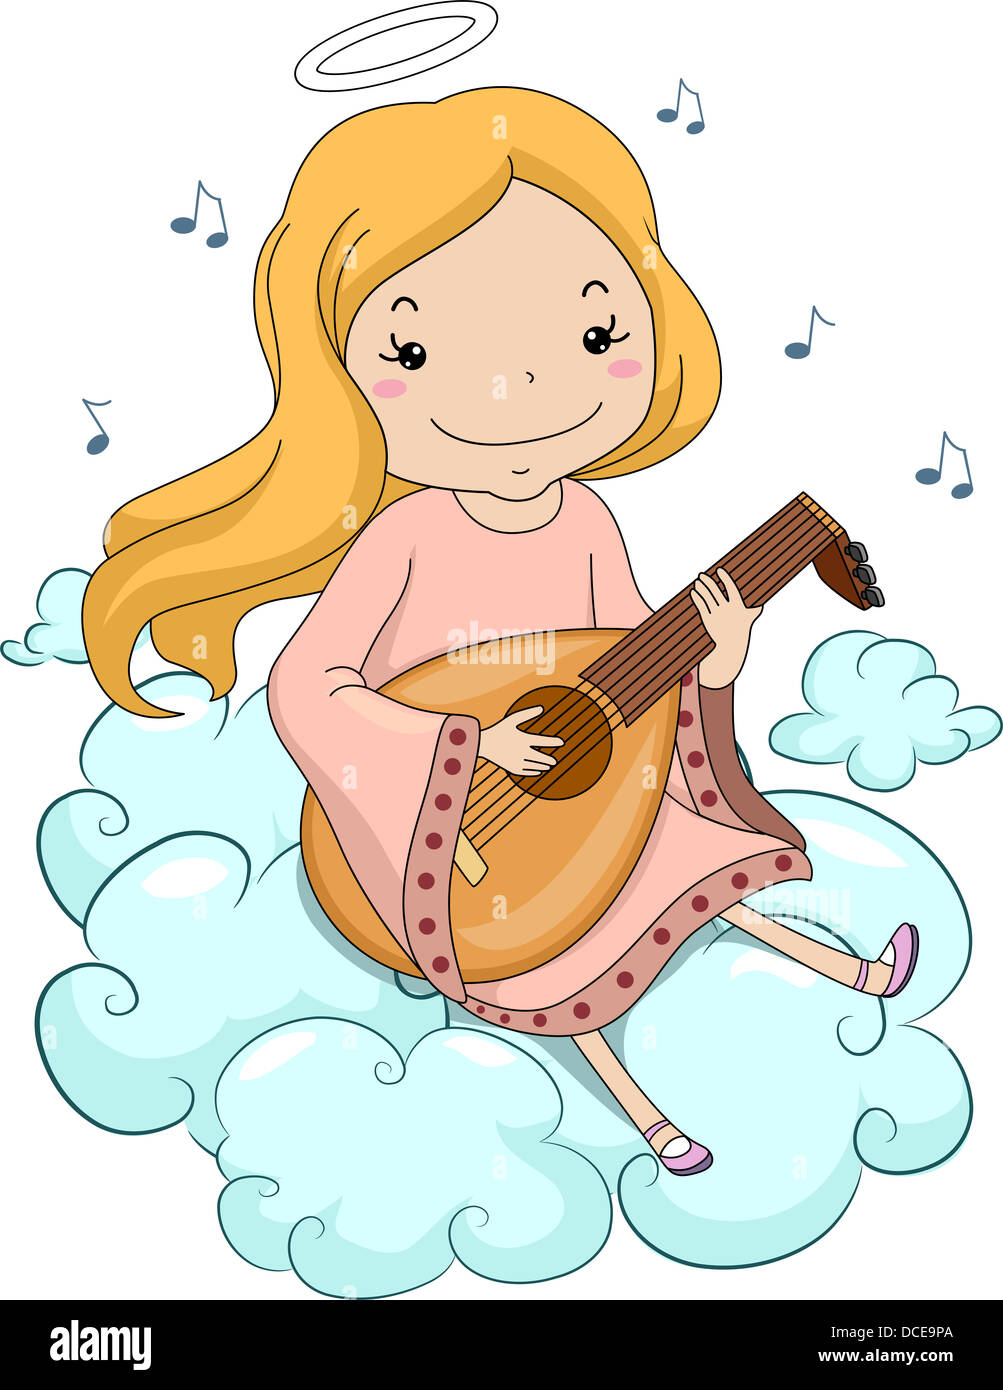 Illustration of a Girl Angel Sitting on Clouds Playing Lute Stock Photo